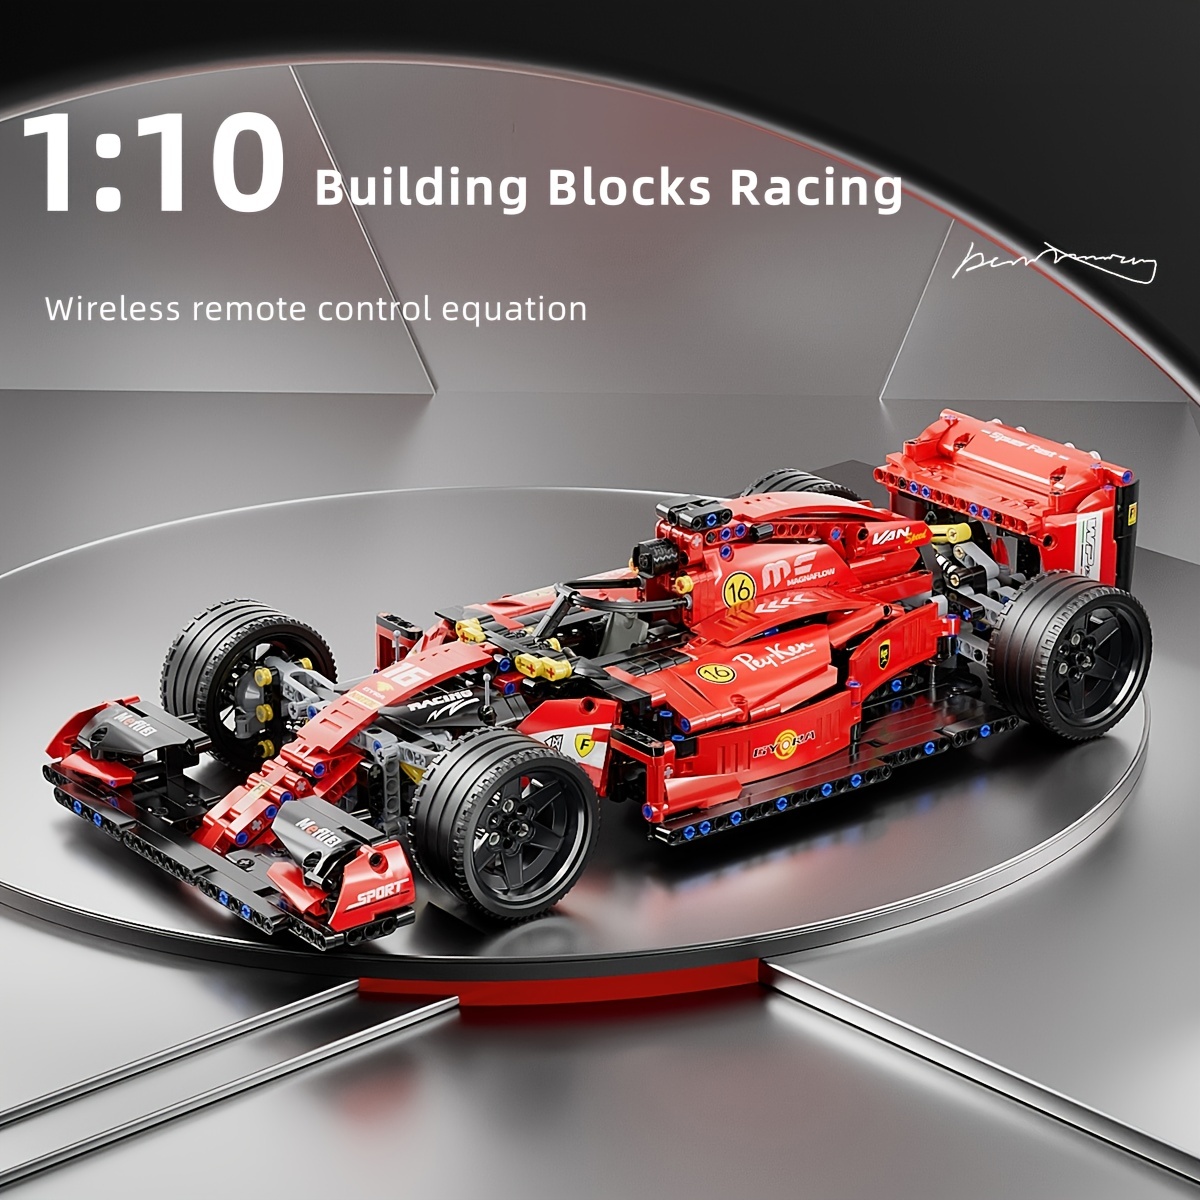 

1163pcs Building Block Car, 1:10 Formula Racing Car Design, Cool Red Appearance Puzzle Toys, Simple And Easy Assemble, Holiday/birthday/new Year Gift